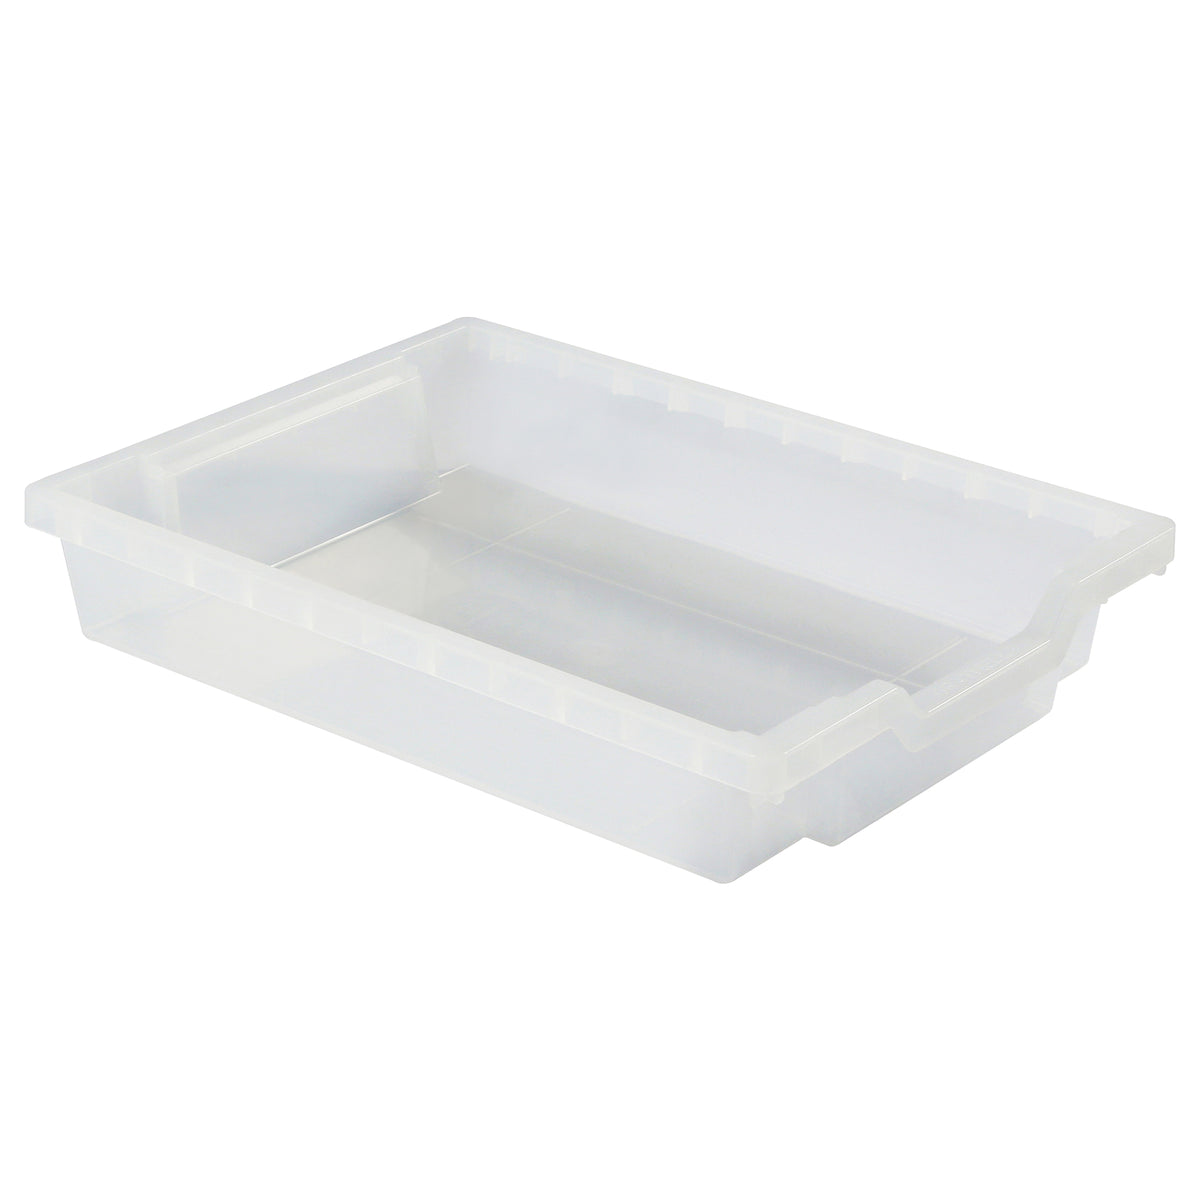 Translucent Bins - Small (Pack of 10)